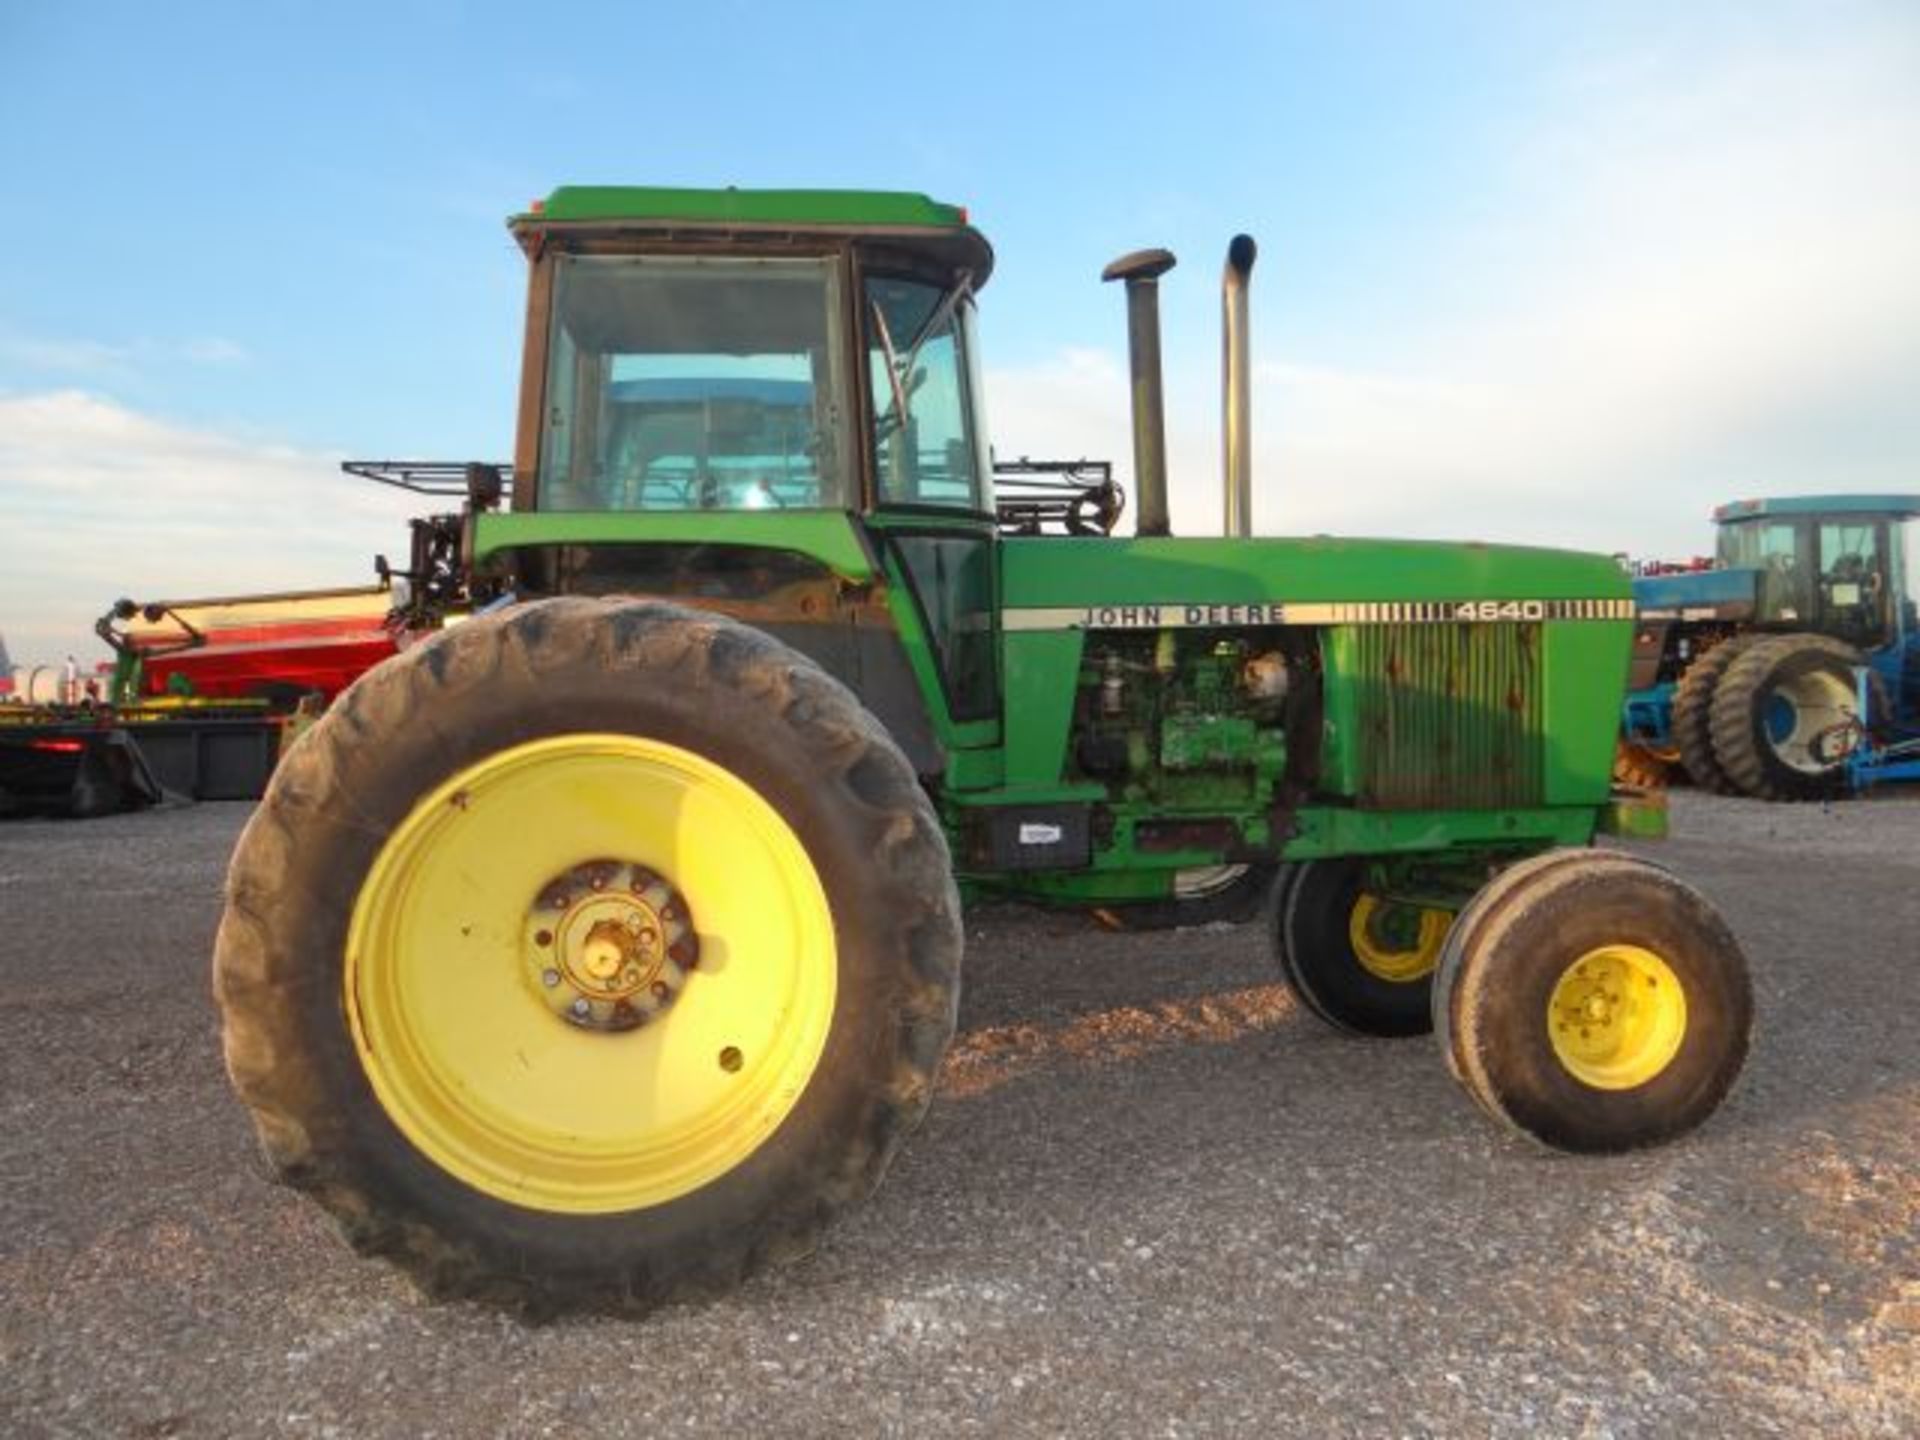 1981 JD 4640 Tractor 9330 hrs, 160-180hp, 3pt Hitch, 3 SCV, sn# 4640H023975RW - Image 5 of 5